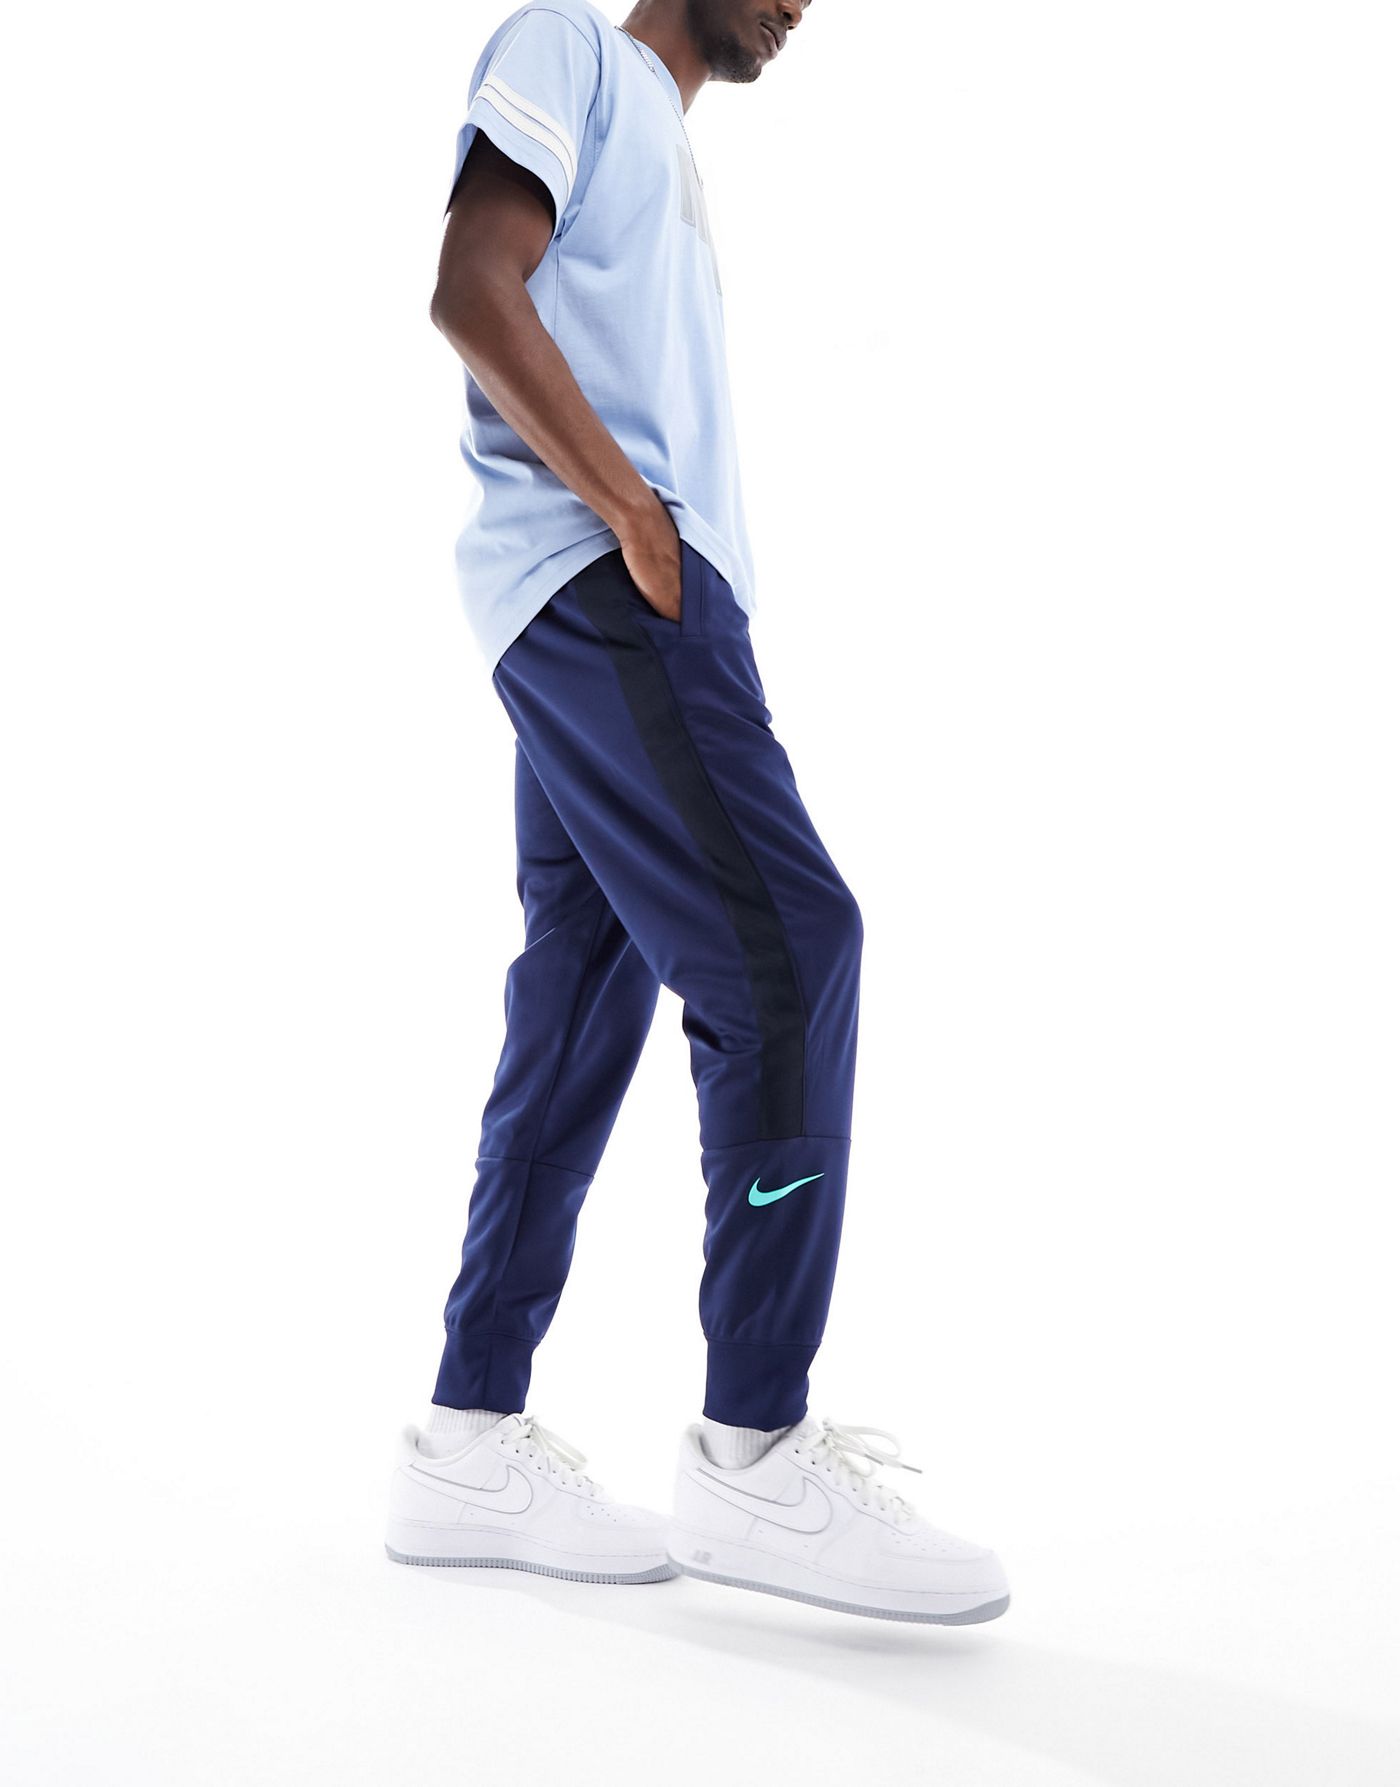 Nike Air joggers in navy 